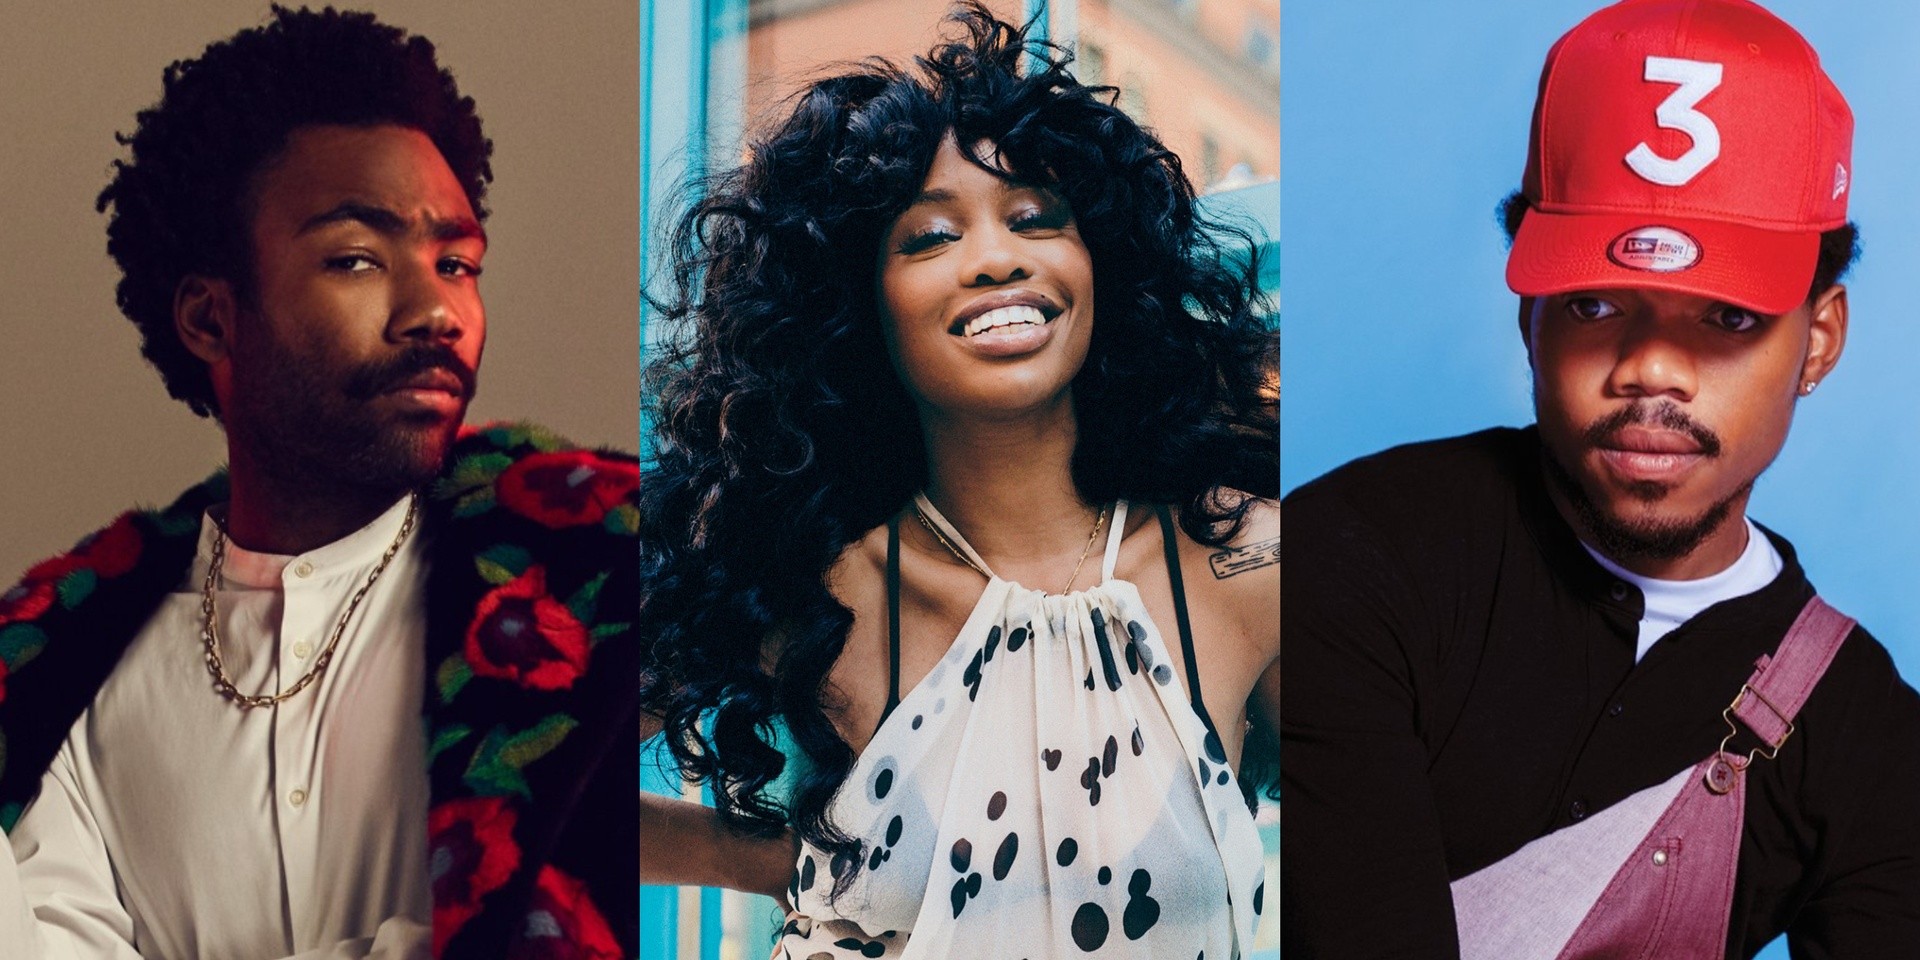 Splendour In The Grass announces line-up – Childish Gambino, SZA, Chance The Rapper, Tame Impala and more to perform 